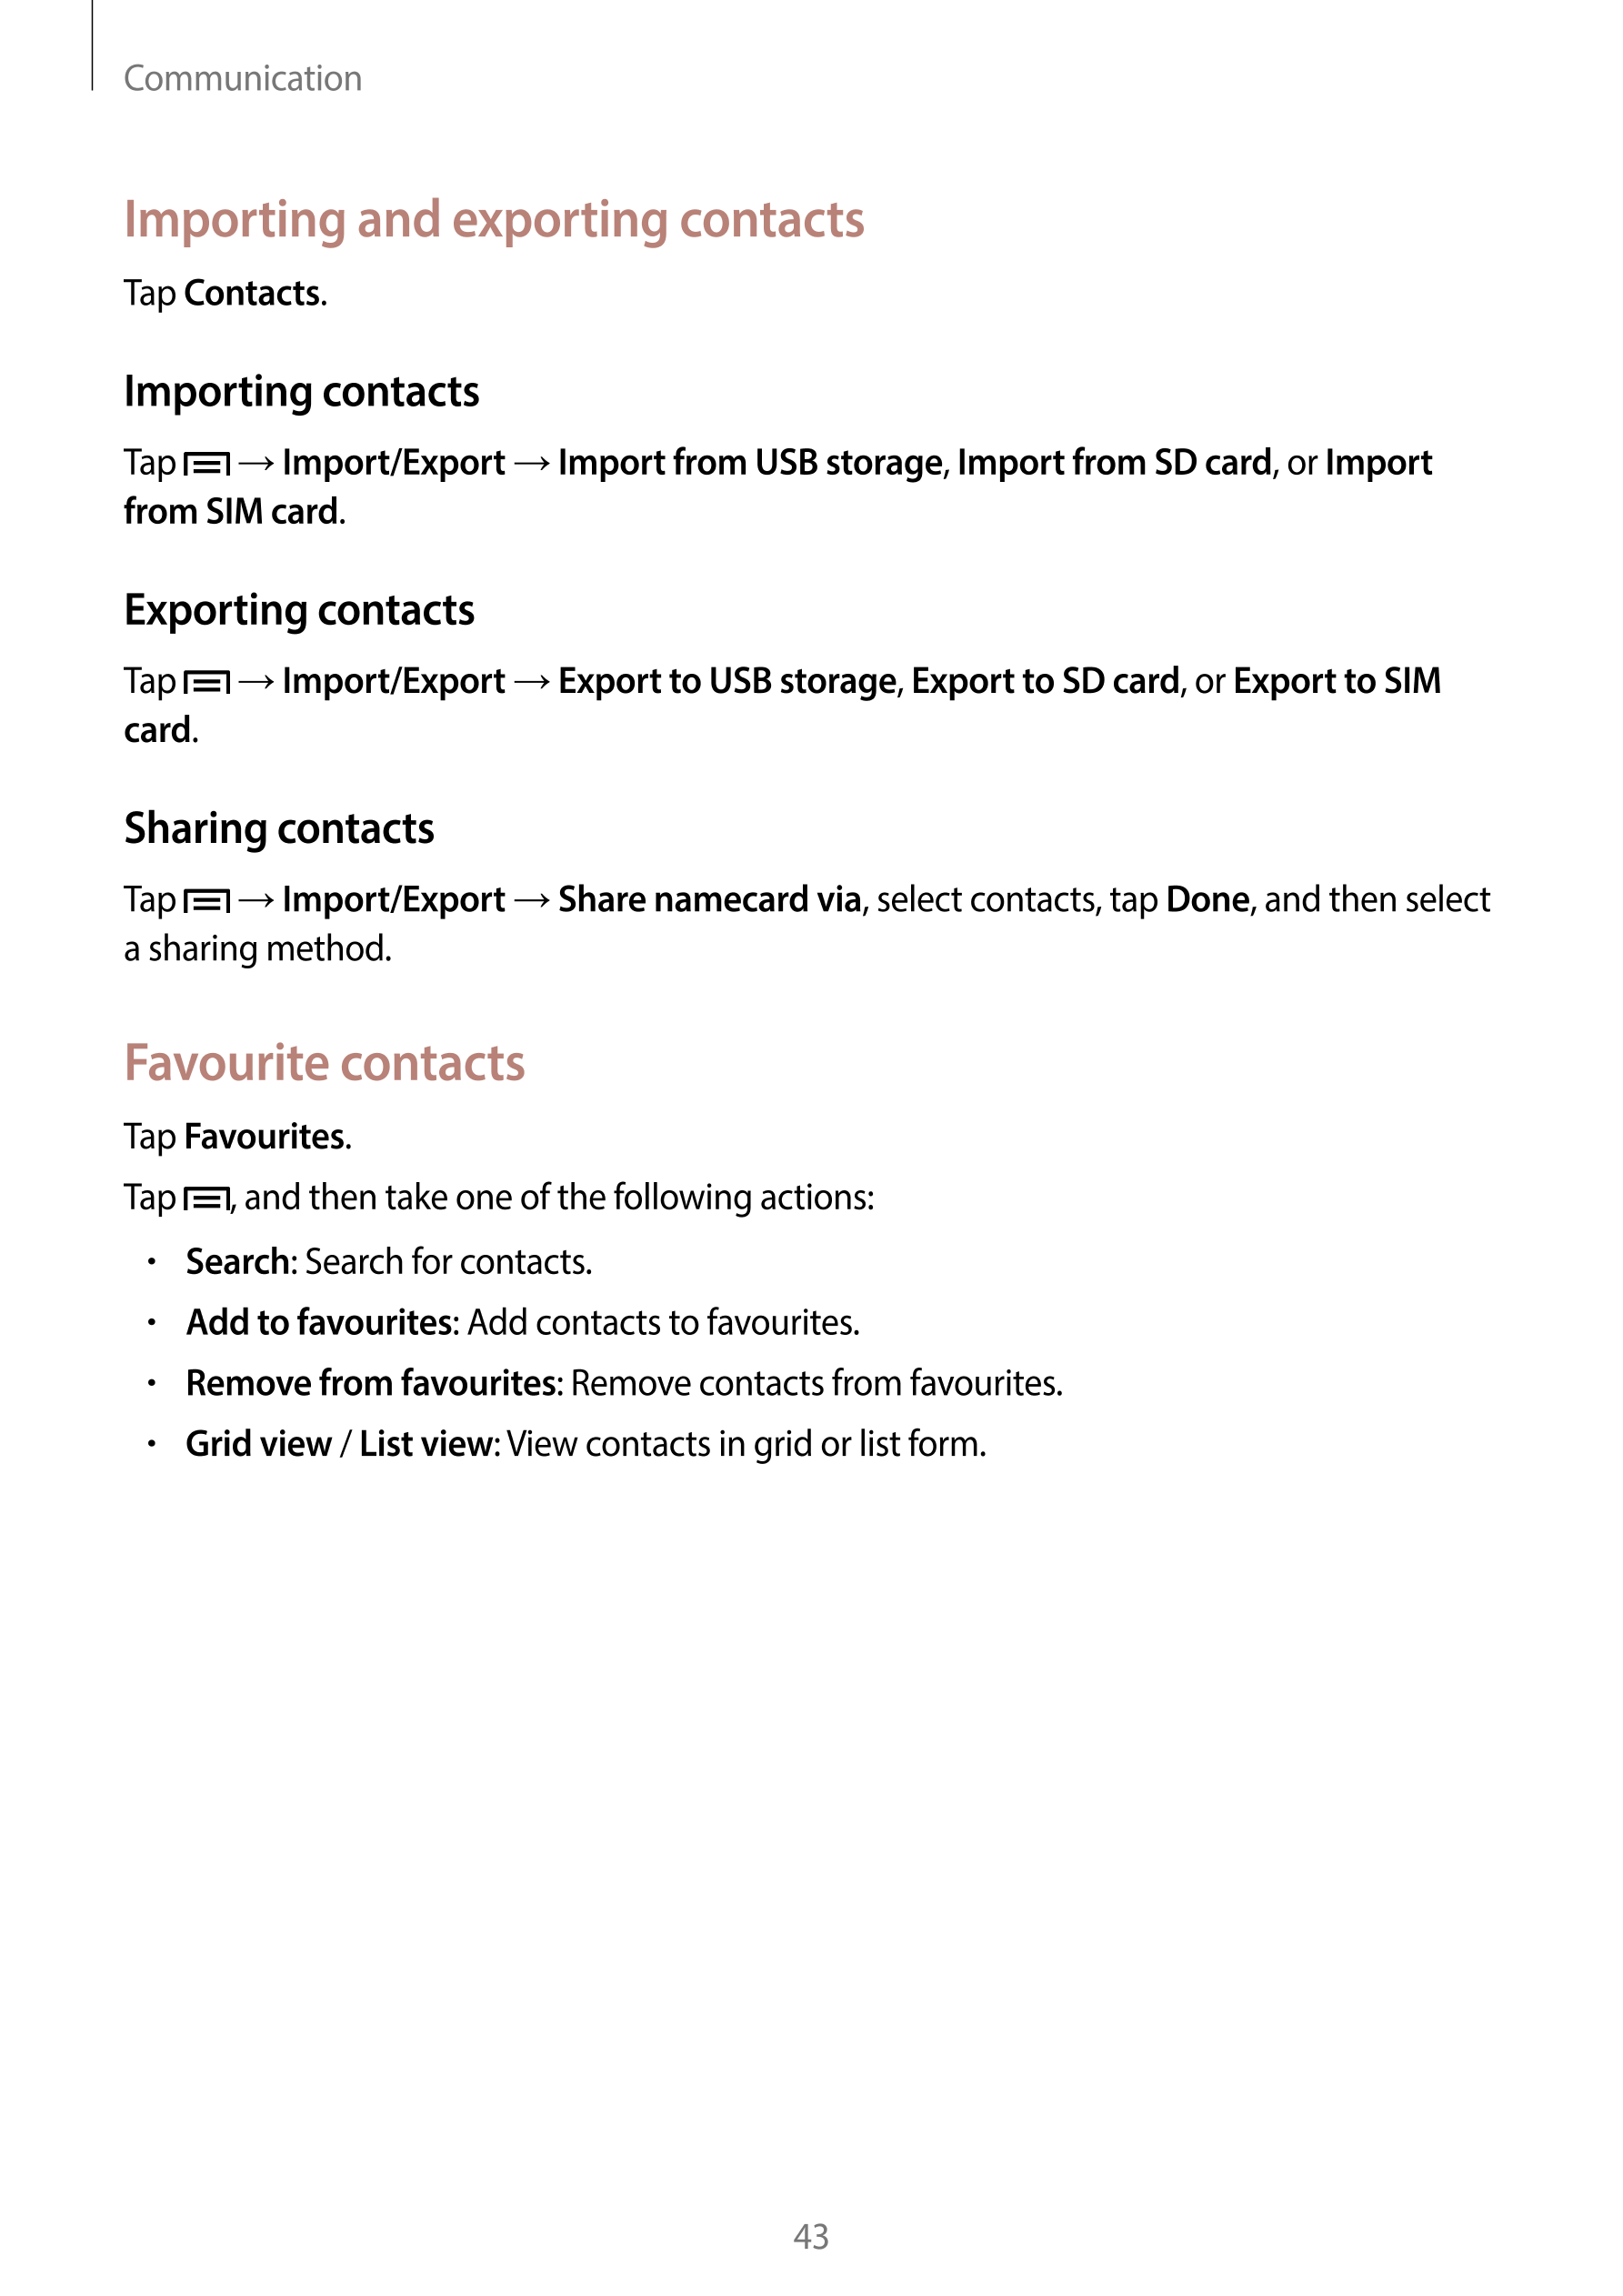 Communication
Importing and exporting contacts
Tap  Contacts.
Importing contacts
Tap    →  Import/Export  →  Import from USB sto